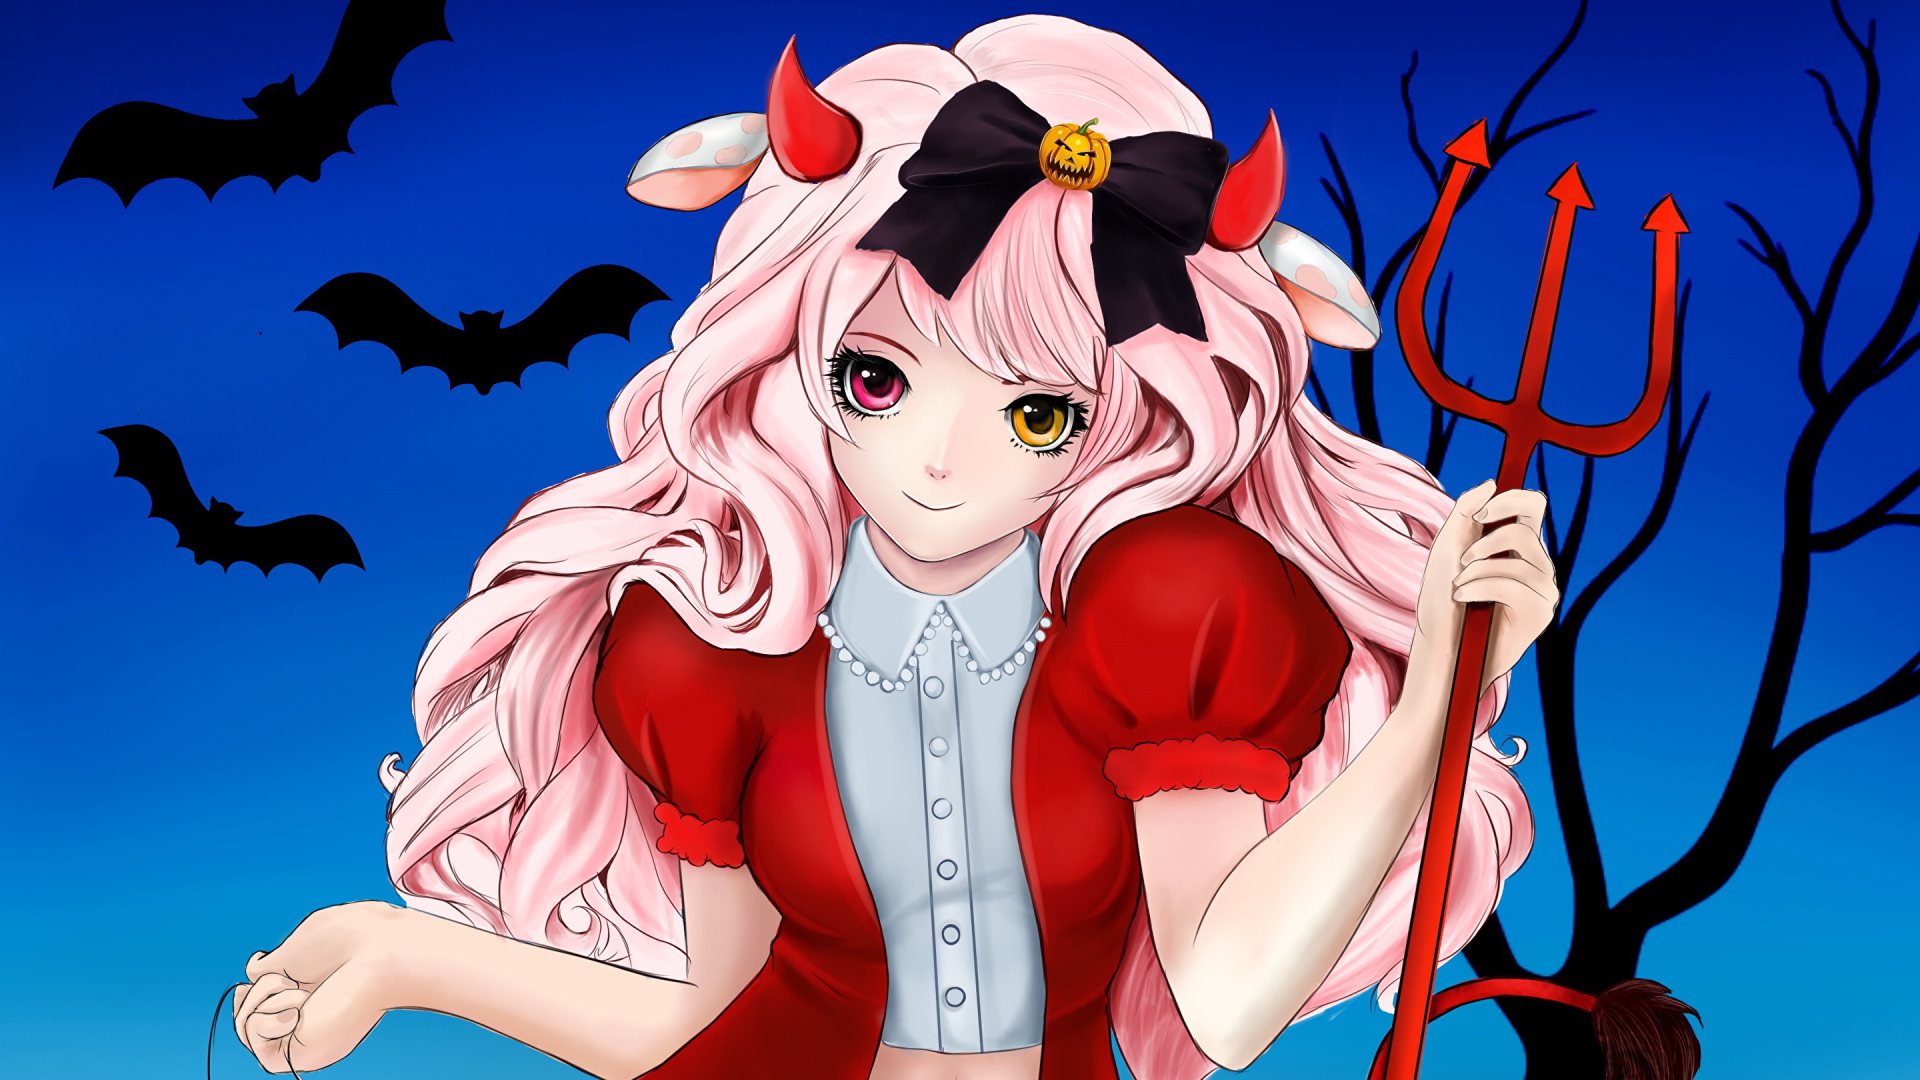 Anime girl in a Halloween costume with a pitchfork